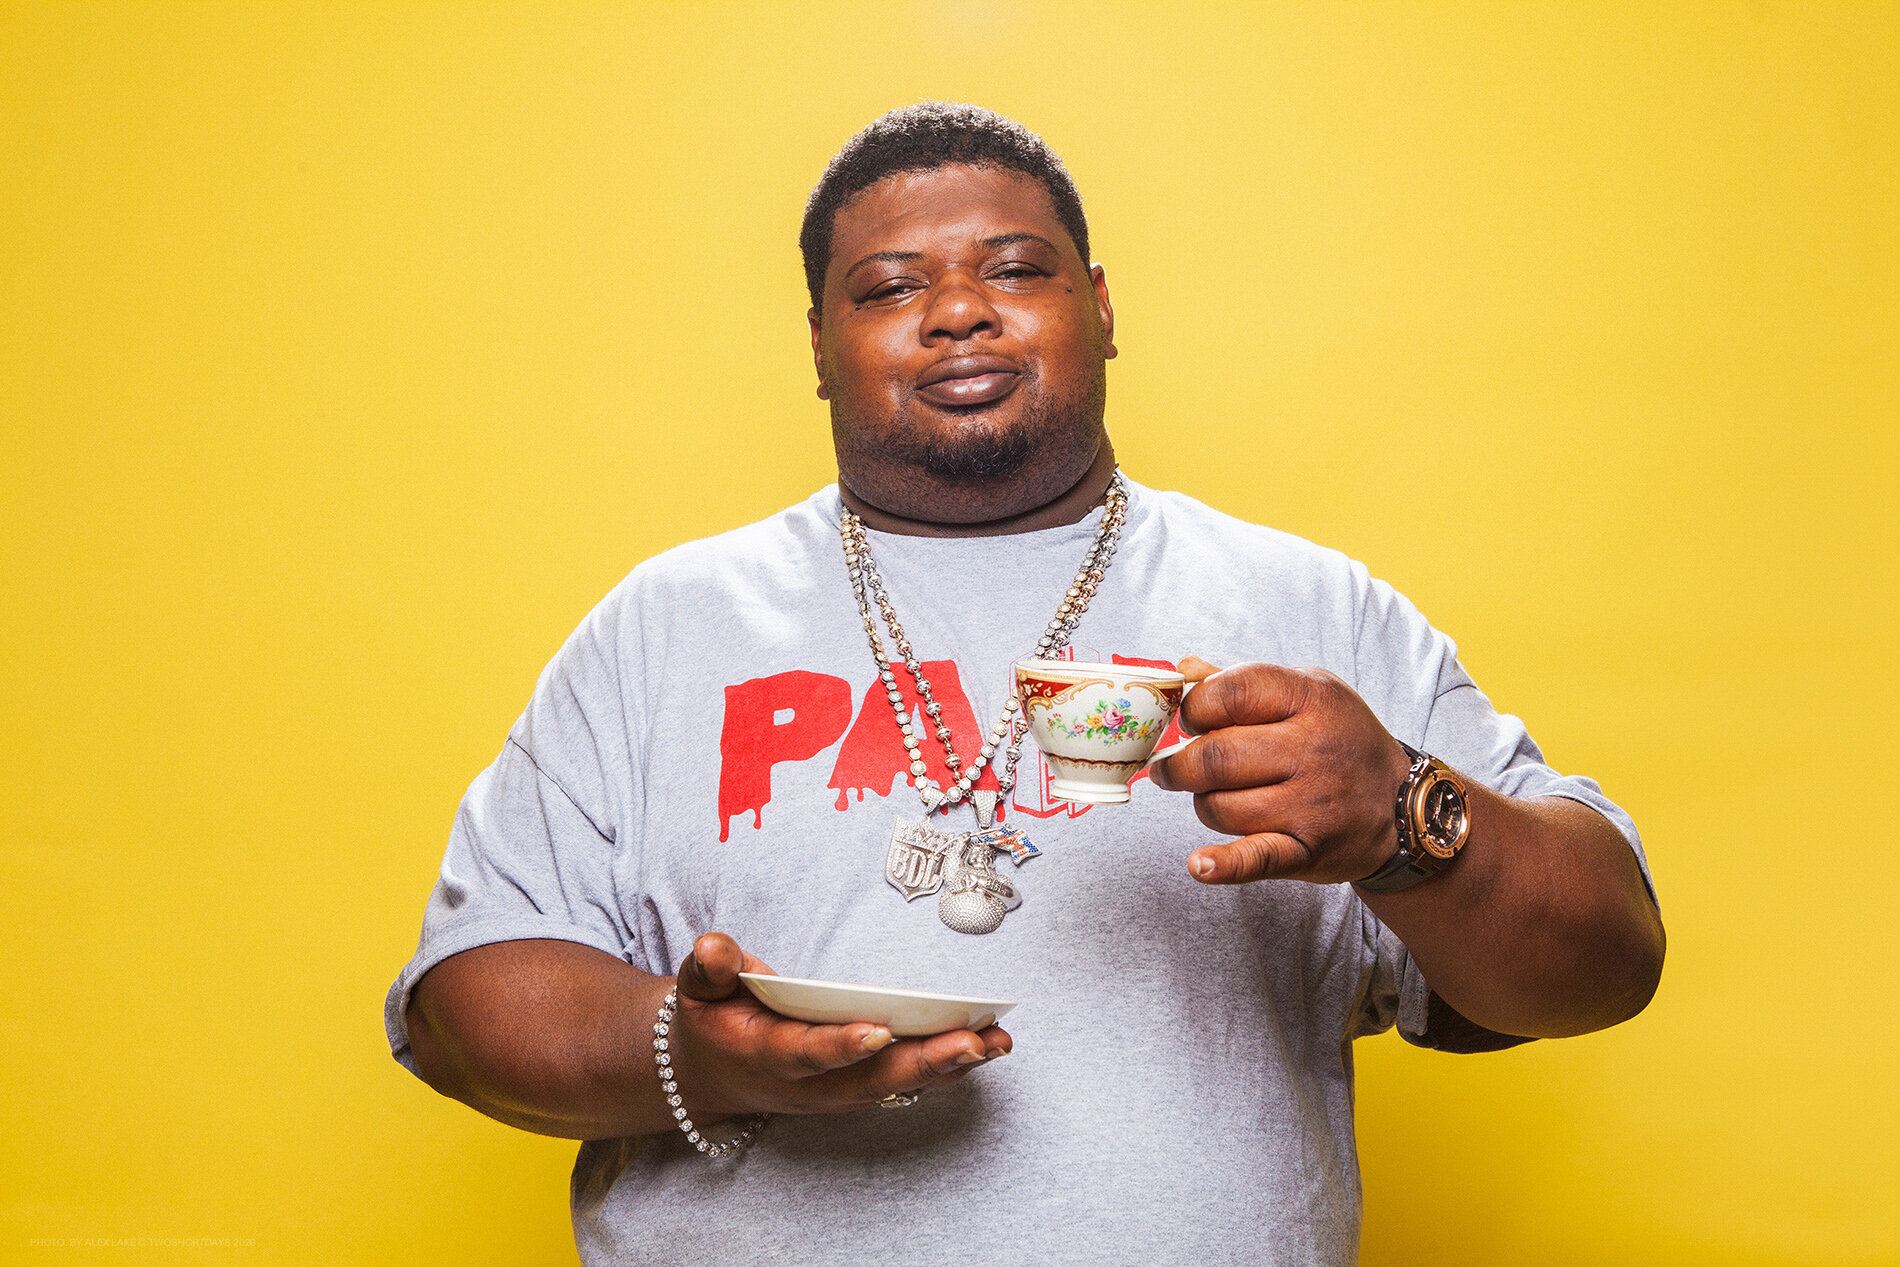 big_narstie_photography_copyright_ALEX_LAKE_do_not_reproduce_without_permission_TWOSHORTDAYS.jpg